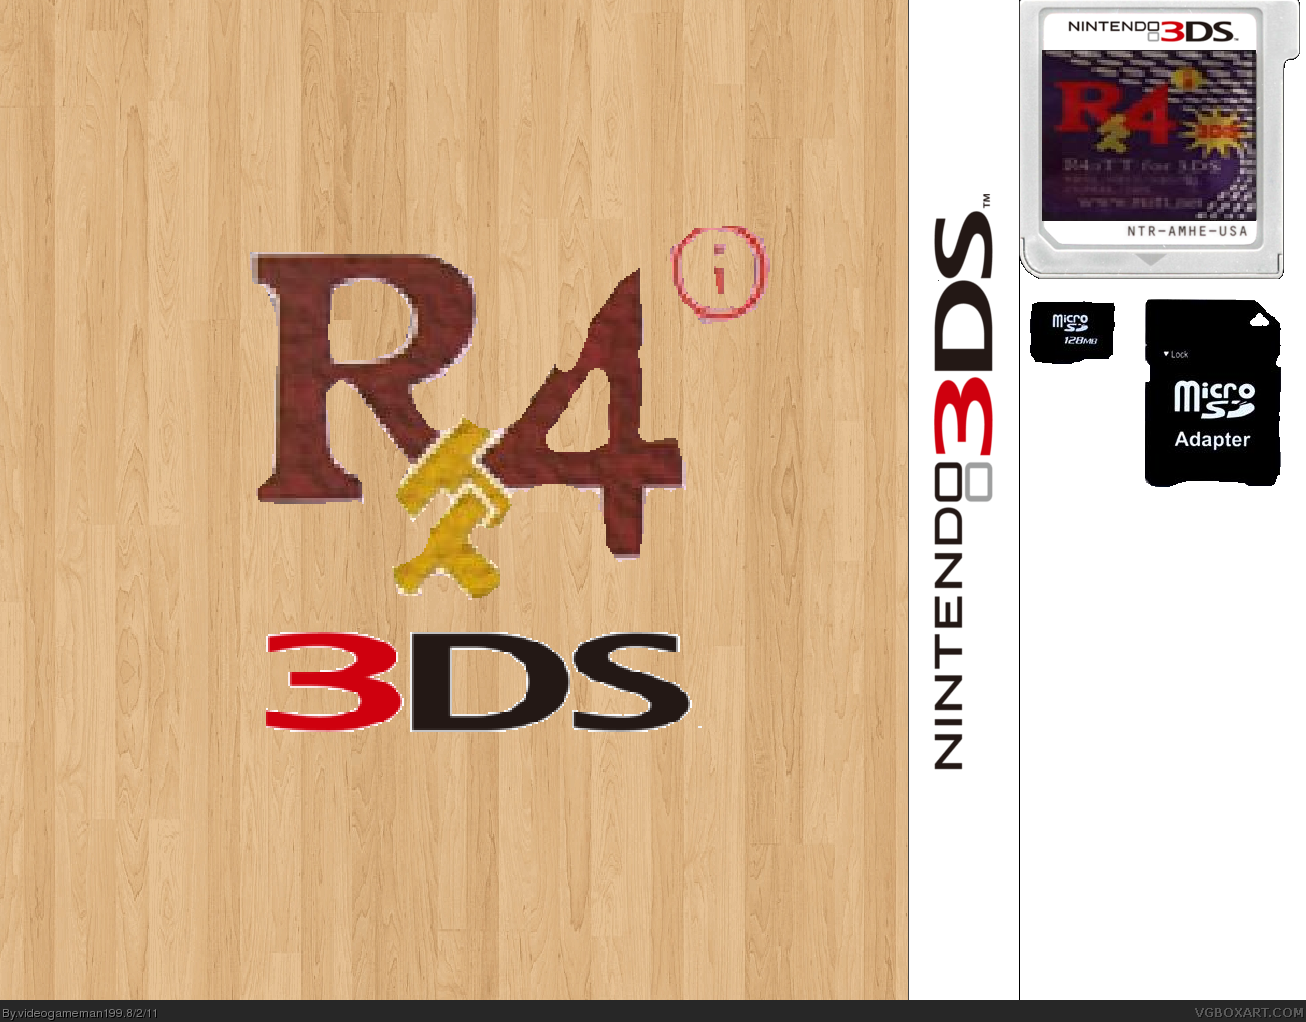 R4i 3DS box cover